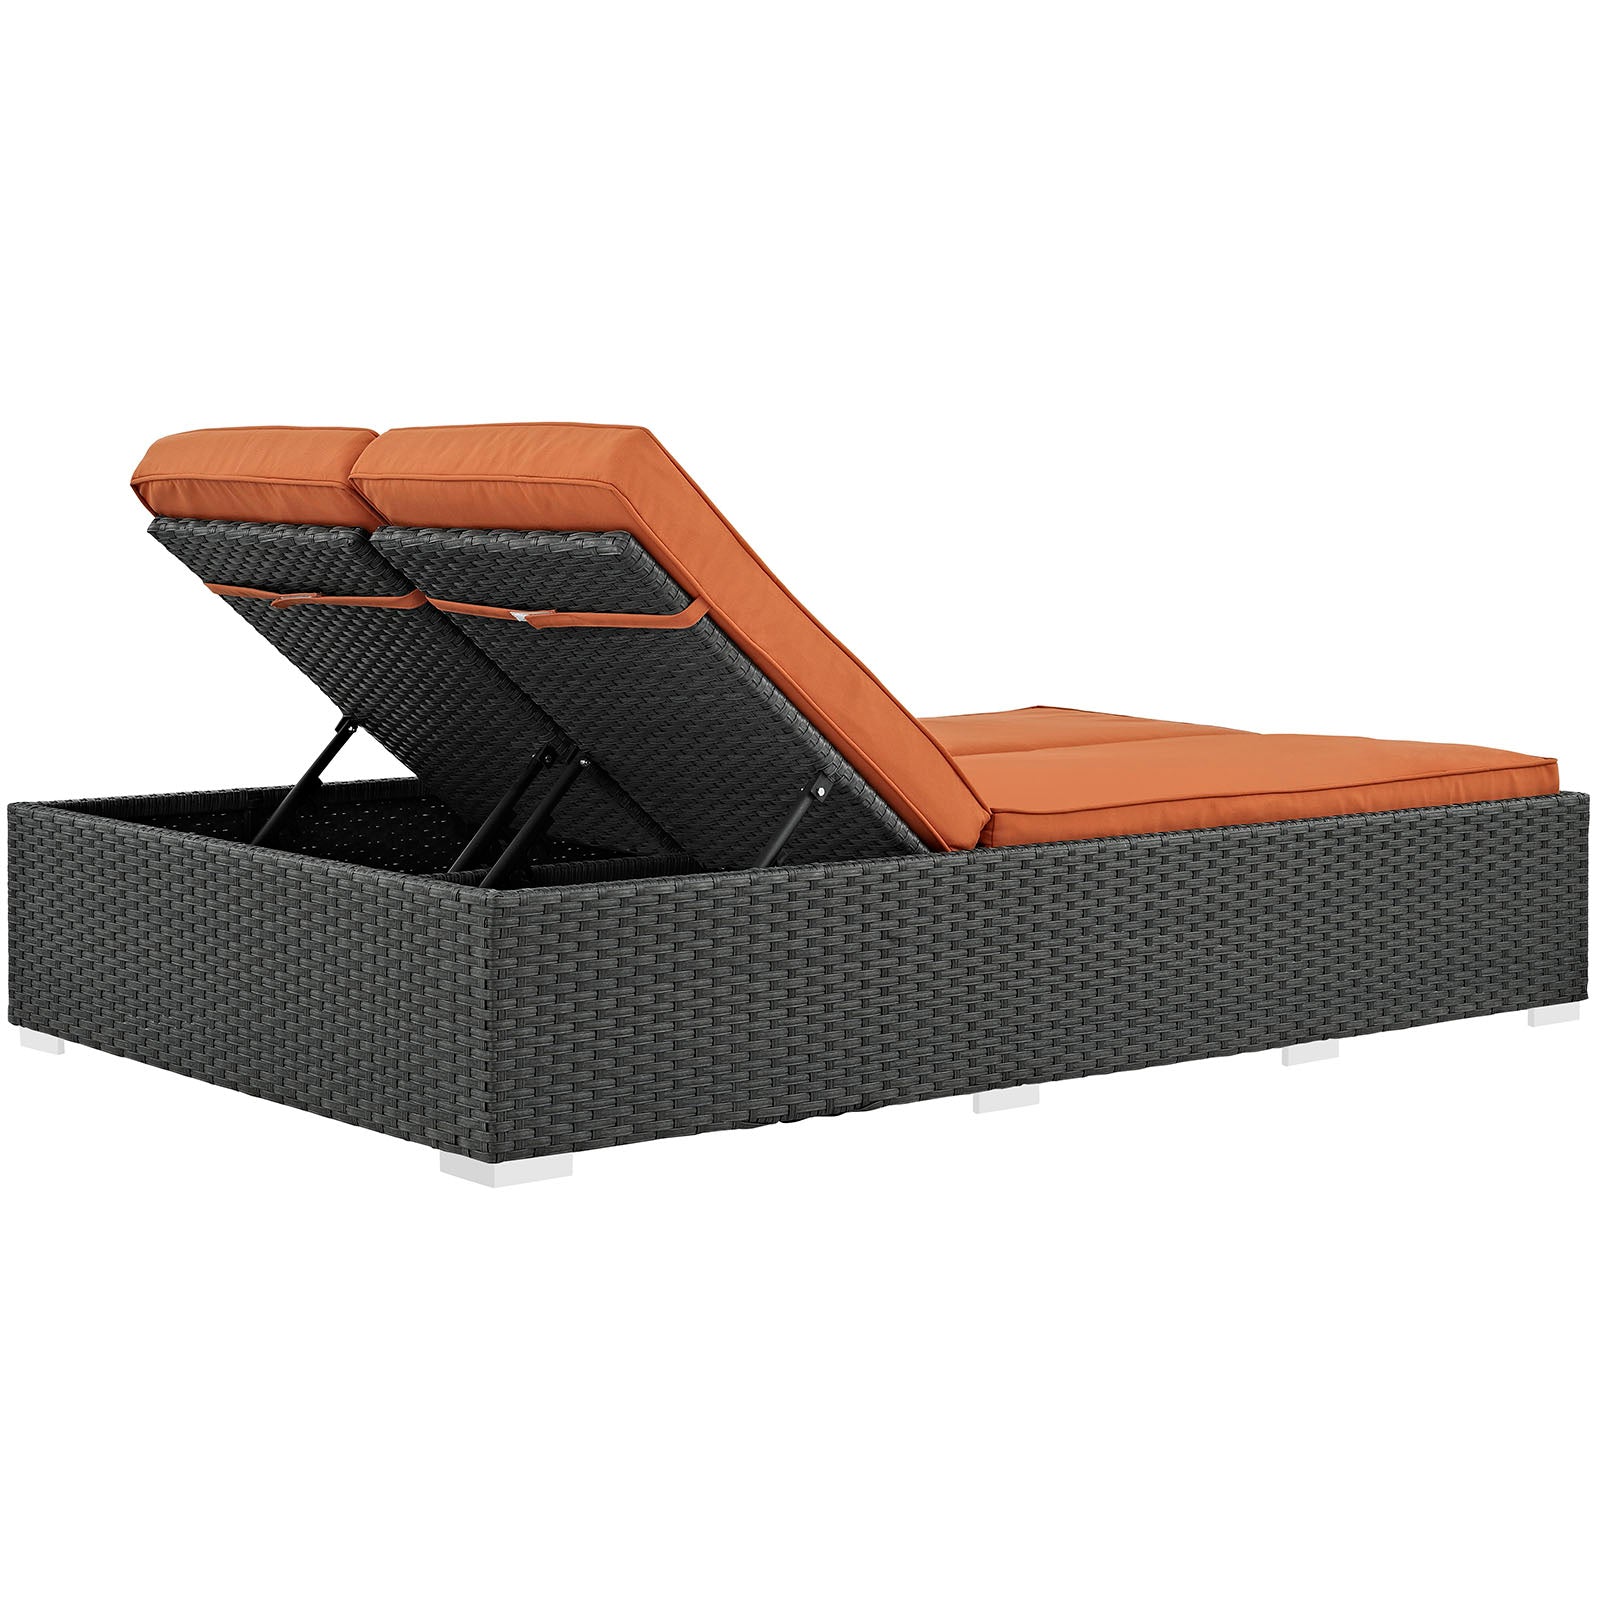 Modway Outdoor Loungers - Sojourn Outdoor Patio Sunbrella Double Chaise Chocolate Tuscan